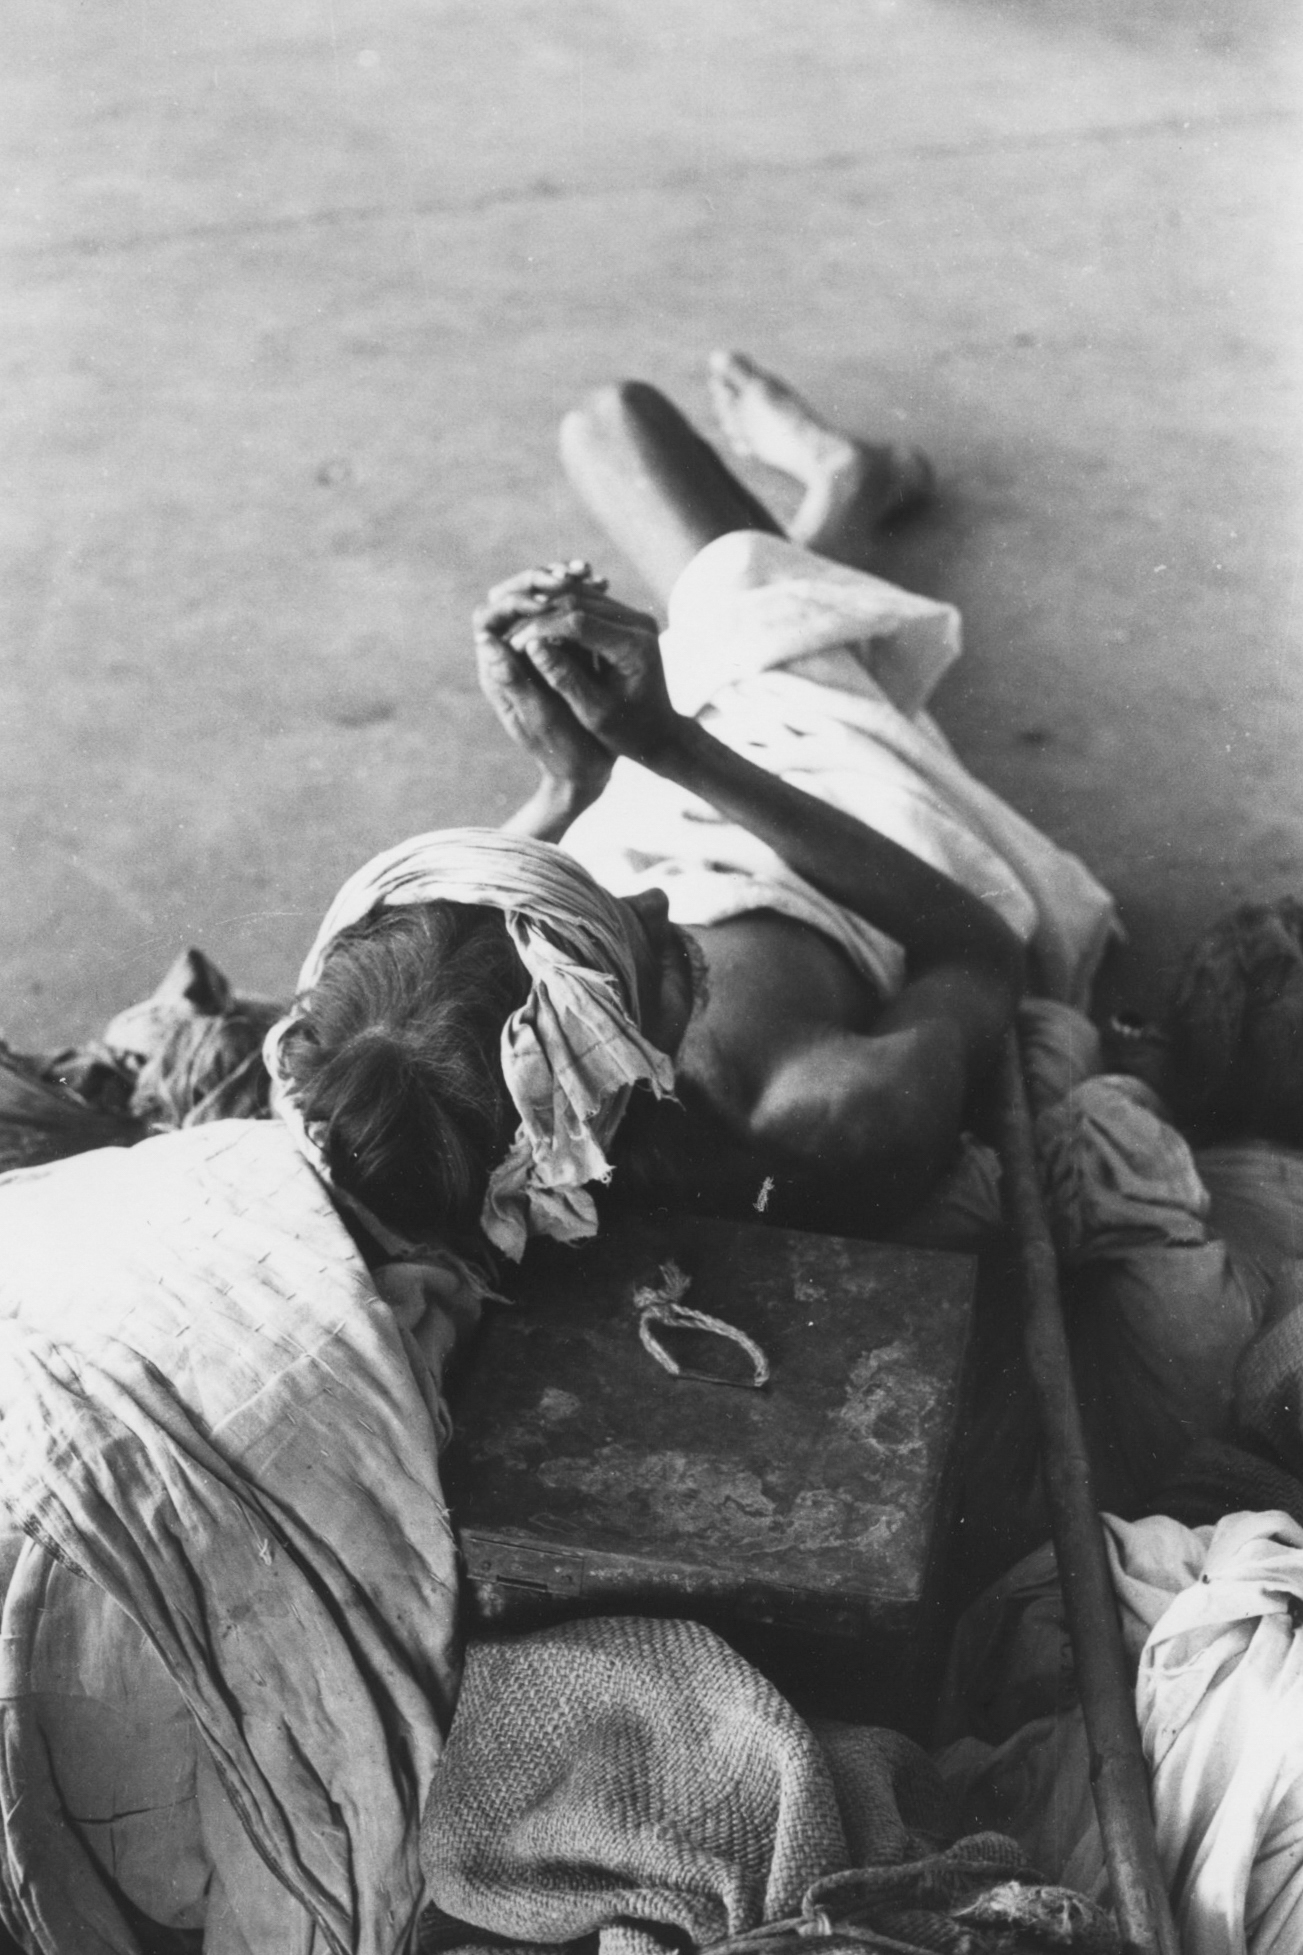   Worker Resting Against Luggage , 1959-1965 